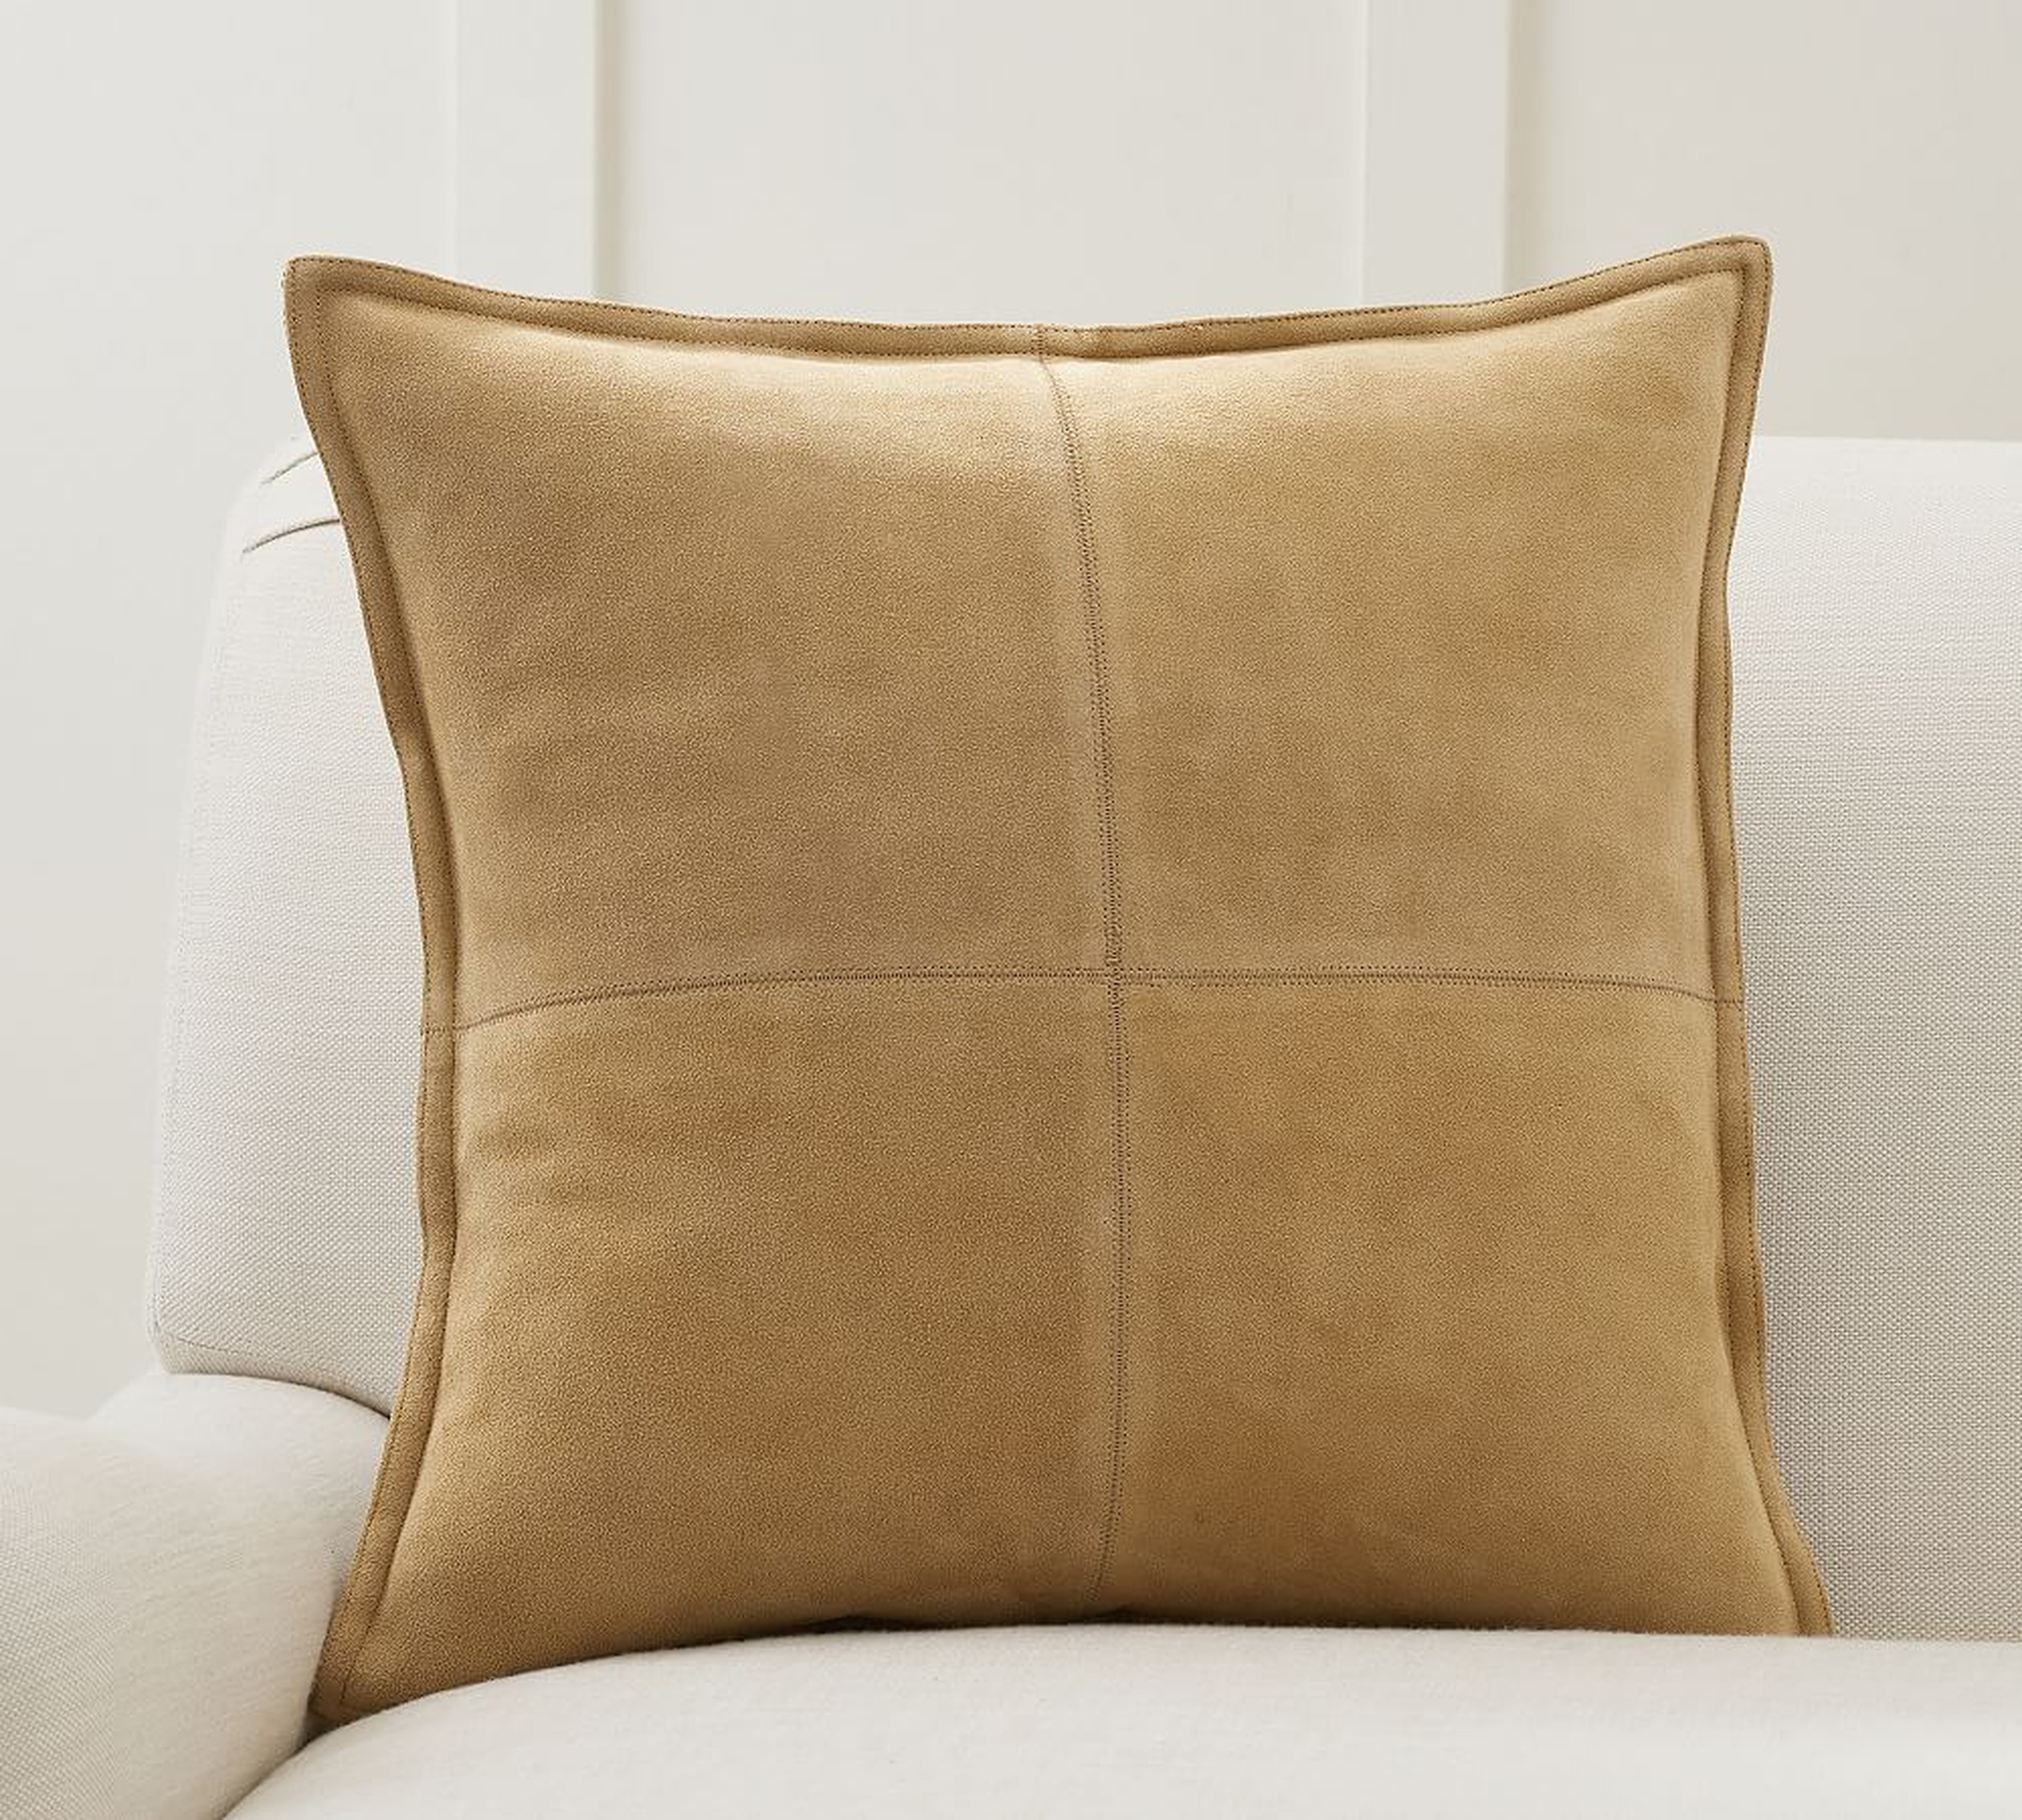 Pieced Suede Pillow Cover, 20", Golden - Pottery Barn